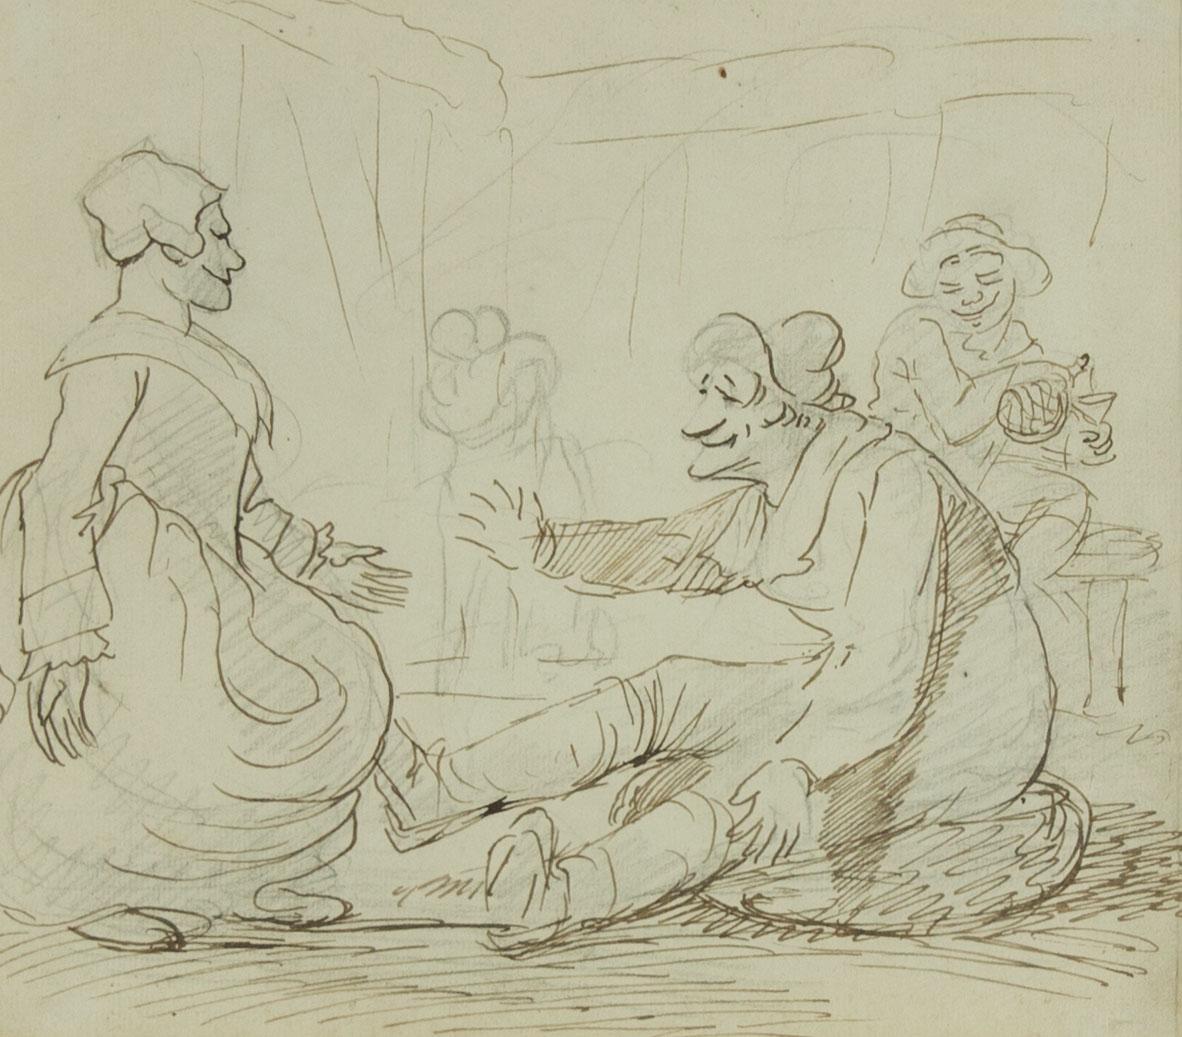 Attrib. to Henry William Bunbury (1750-1811) - Pen and Ink Drawing, Merrymaking - Art by Unknown